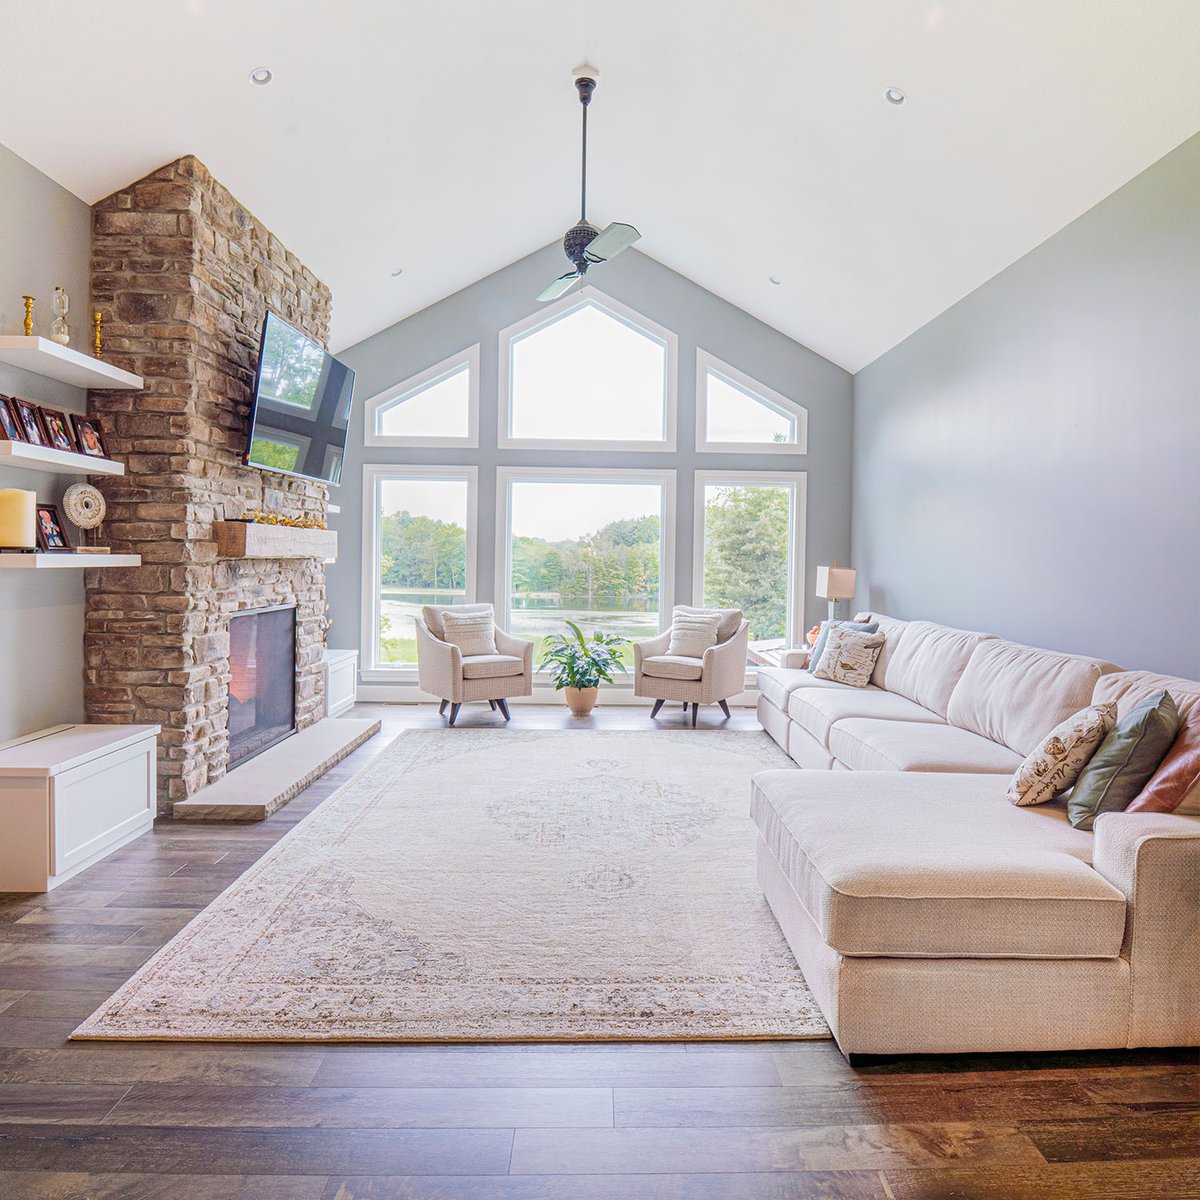 This Master Plan Home offers a sun drenched floor plan, and inspiring scenic view!

#fireplace #livingroomdecor #stonefireplace #interiorinspo #modernfarmhouse #modernfarmhousestyle #bhghome #interiorinspo #housedesign #houseenvy #houseandhome #transitionaldesign #neutralhome